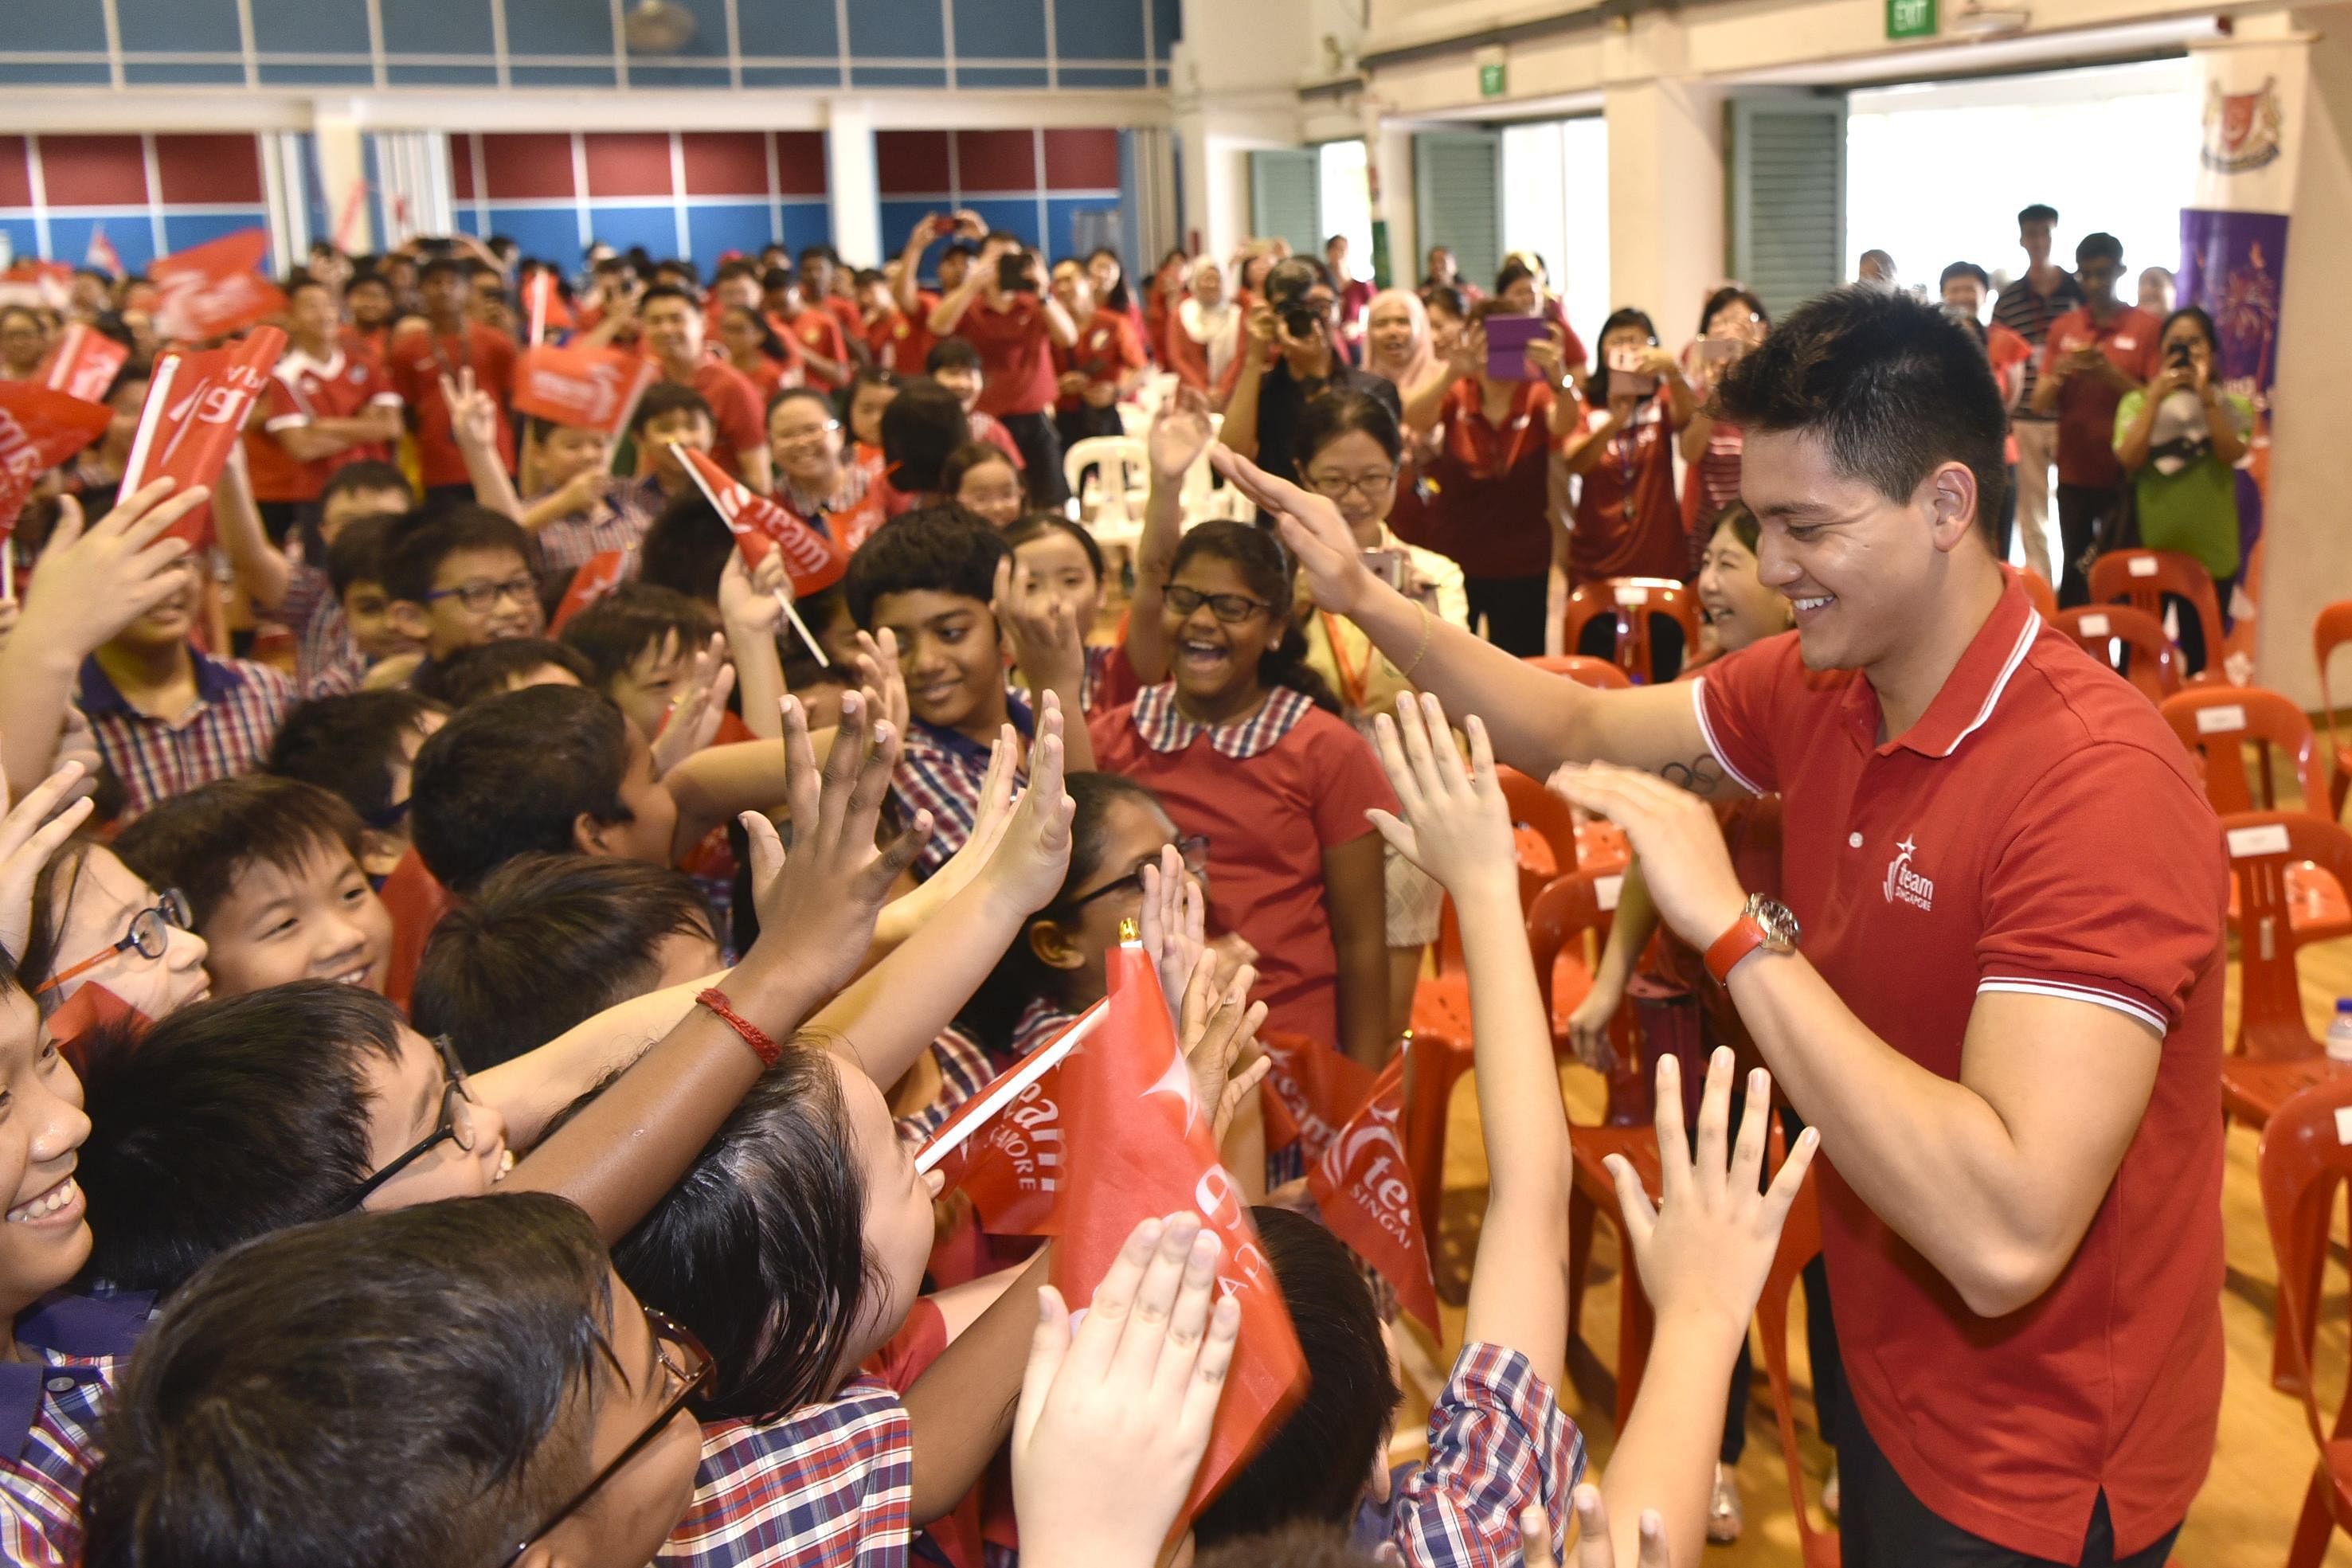 Joseph Schooling made us ‘really proud to be a Singaporean’